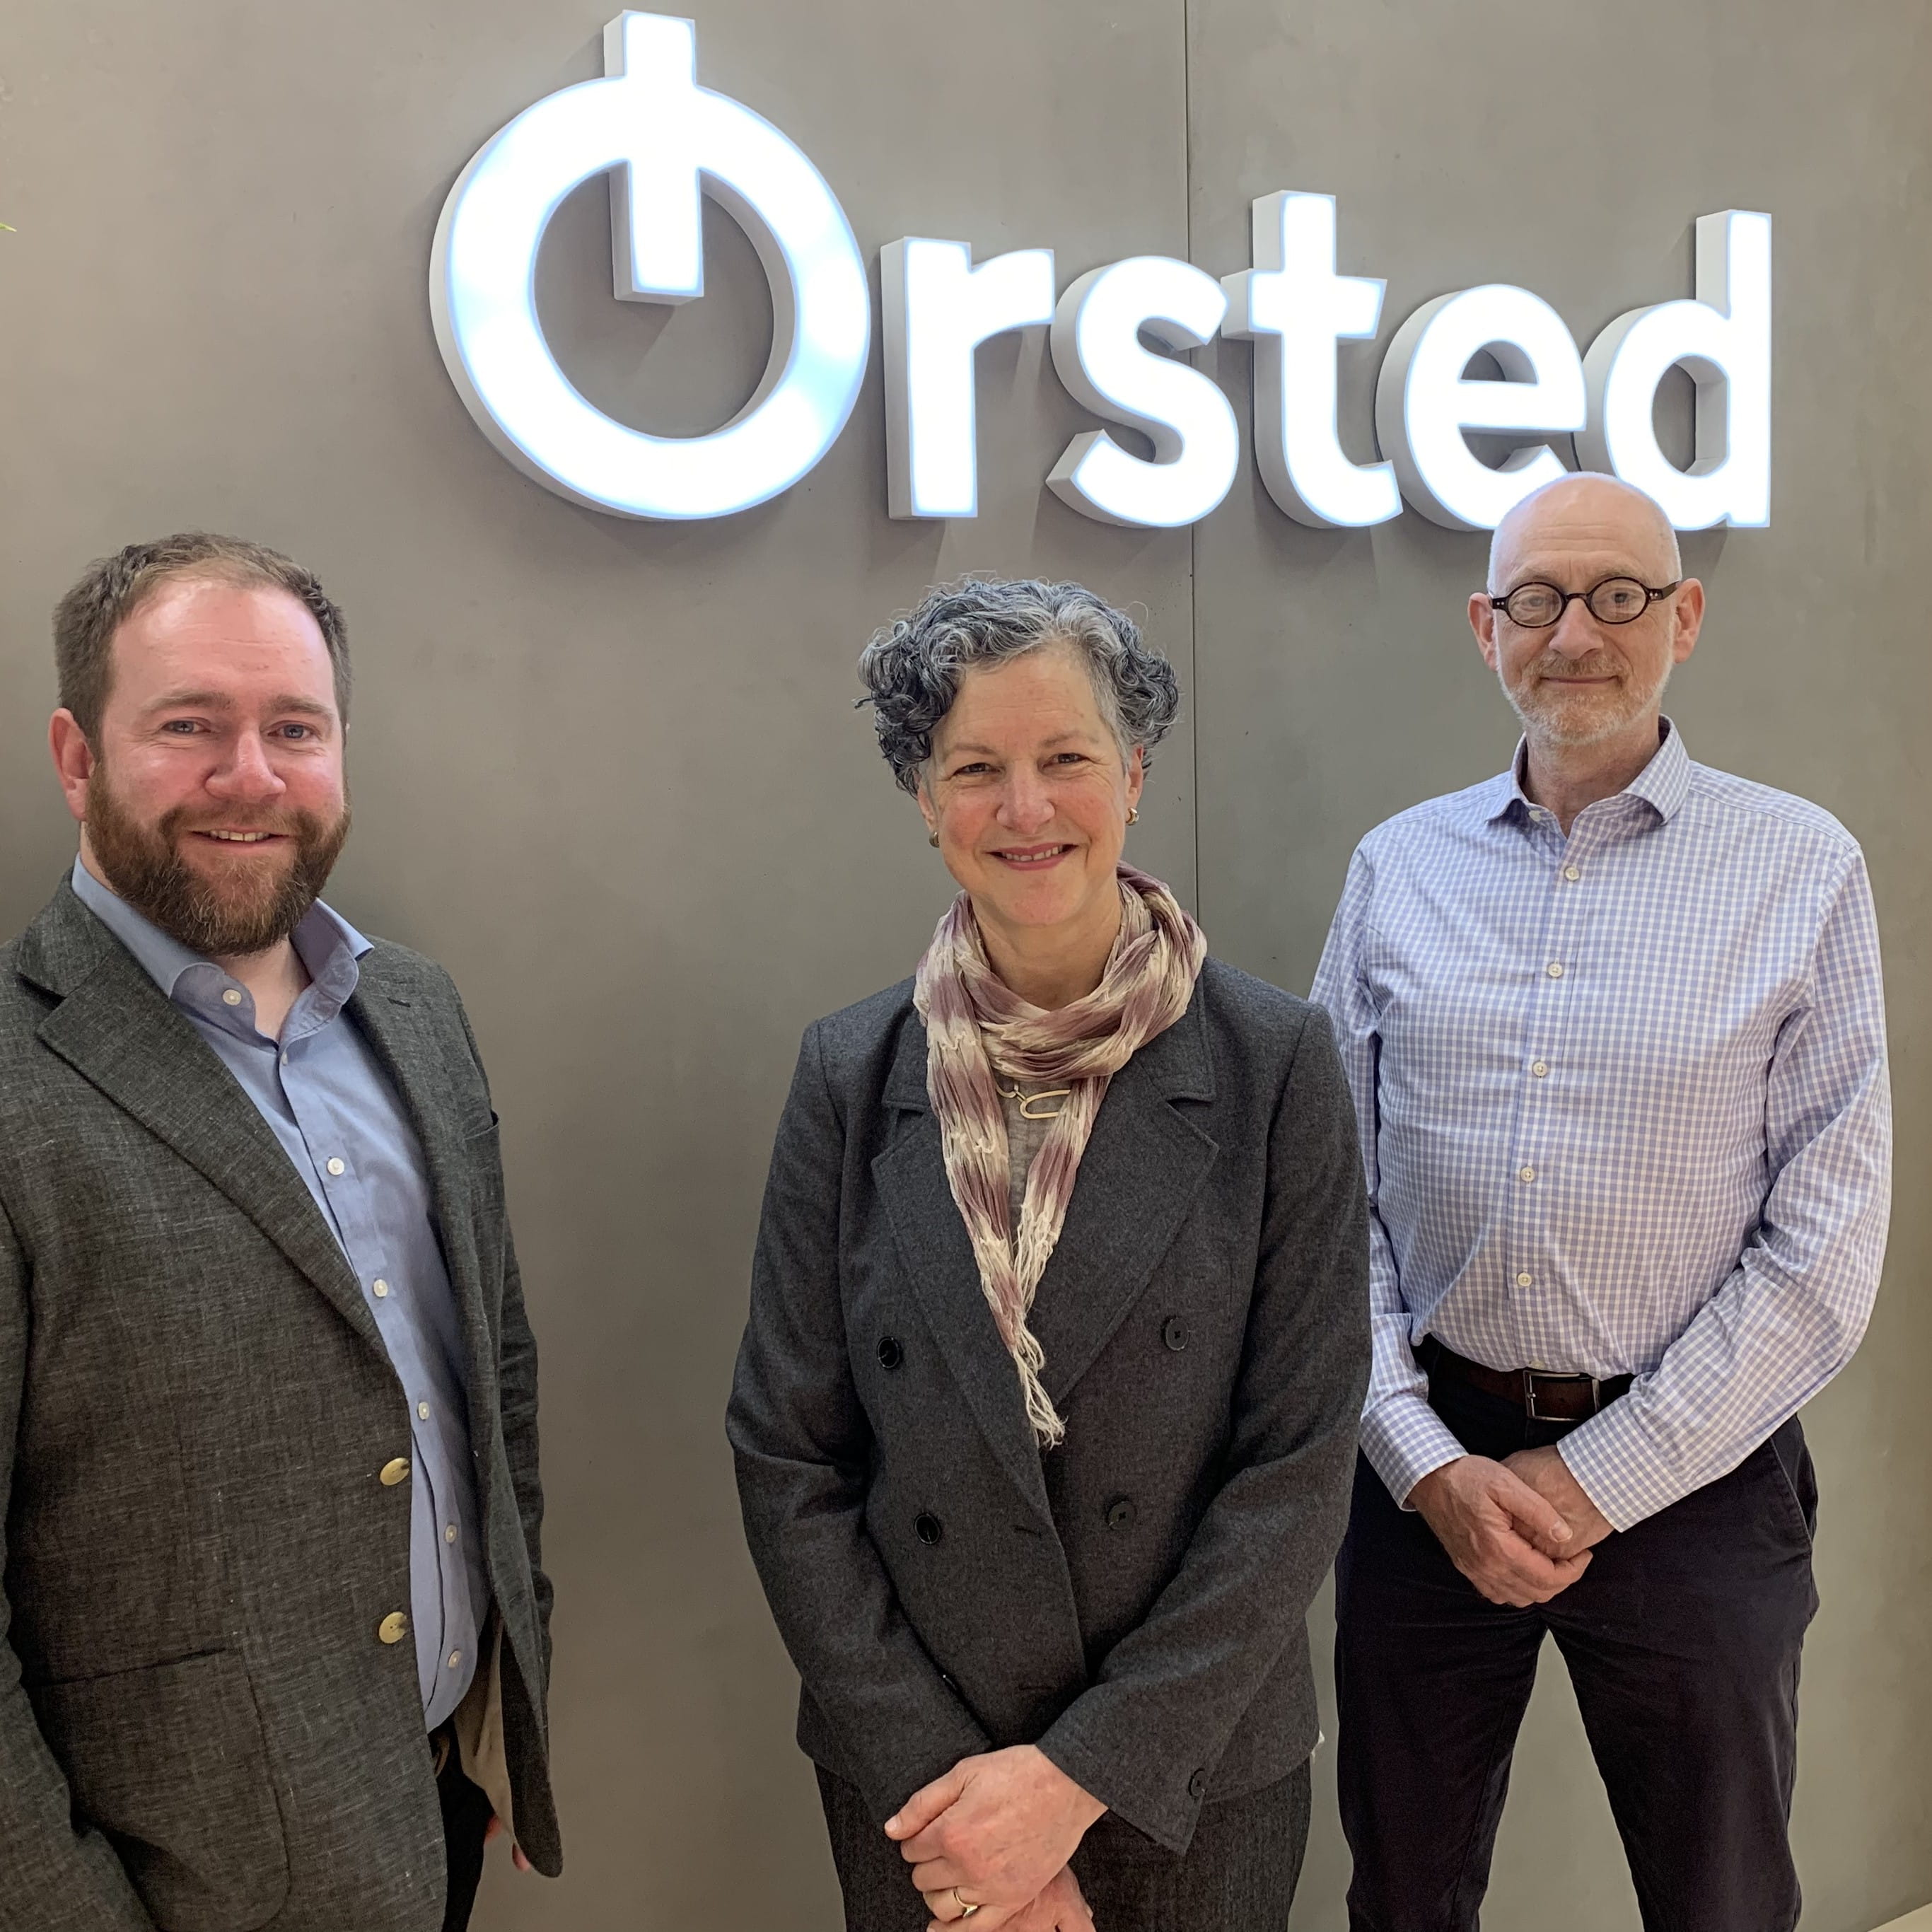 Above: (l-r) David Bould, Ørsted Head of UK&IE Ventures and Open Innovation, new Ørsted Chair of Green Energy Systems at Durham University, Professor Simone Abram and Benj Sykes, Ørsted Head of Environment, Consents and External Affairs